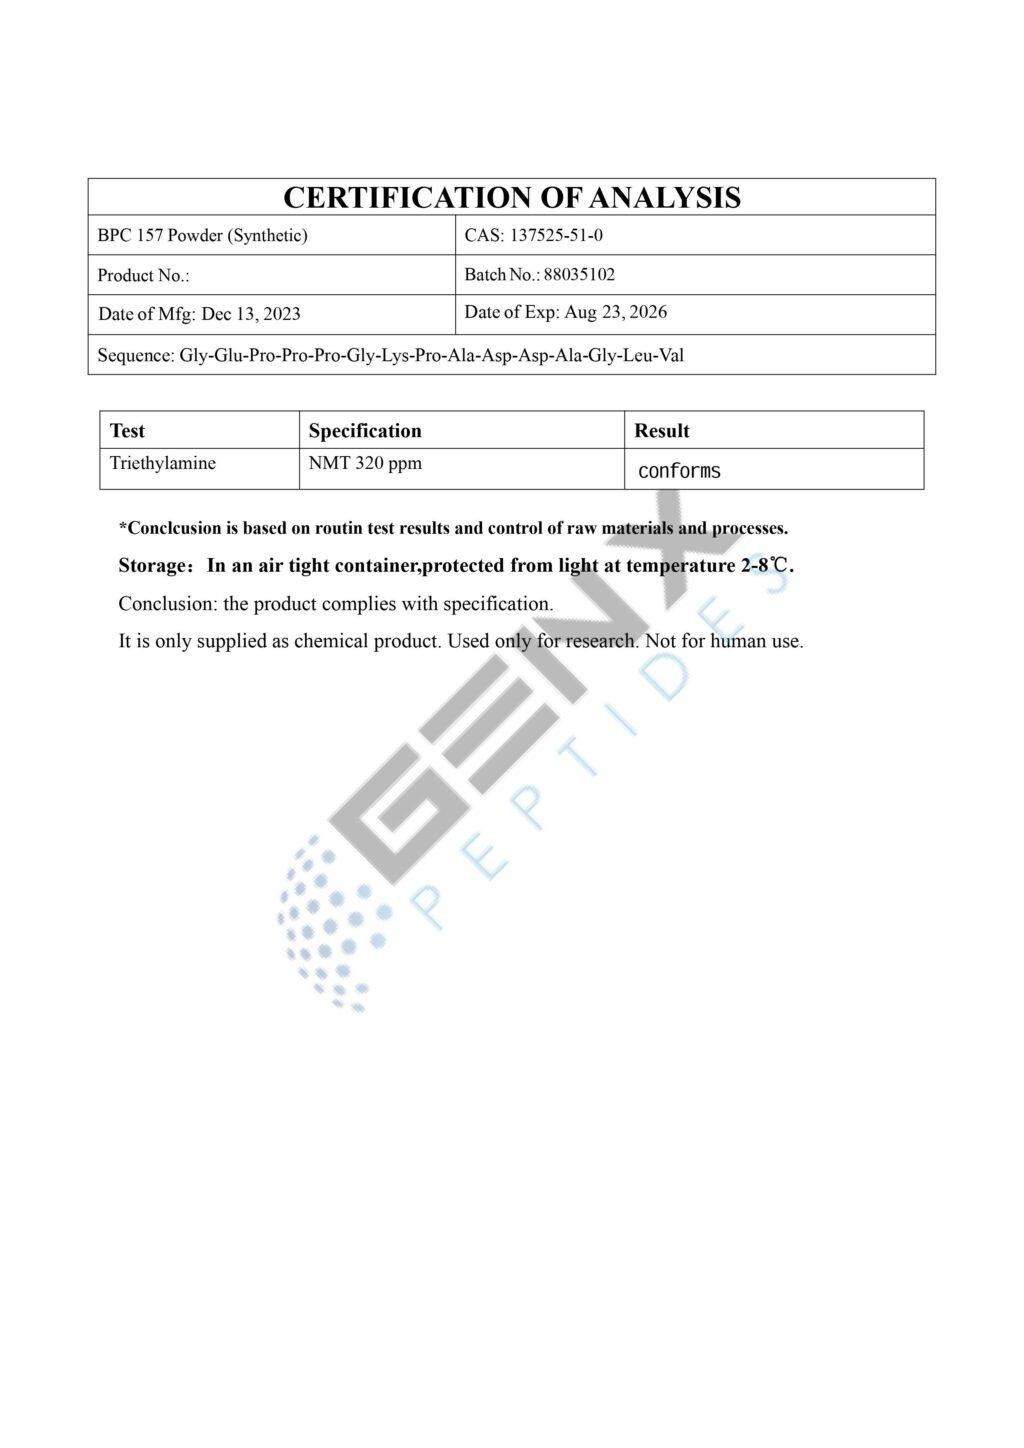 Chemical Certificate of Analysis for BPC 157 Powder.